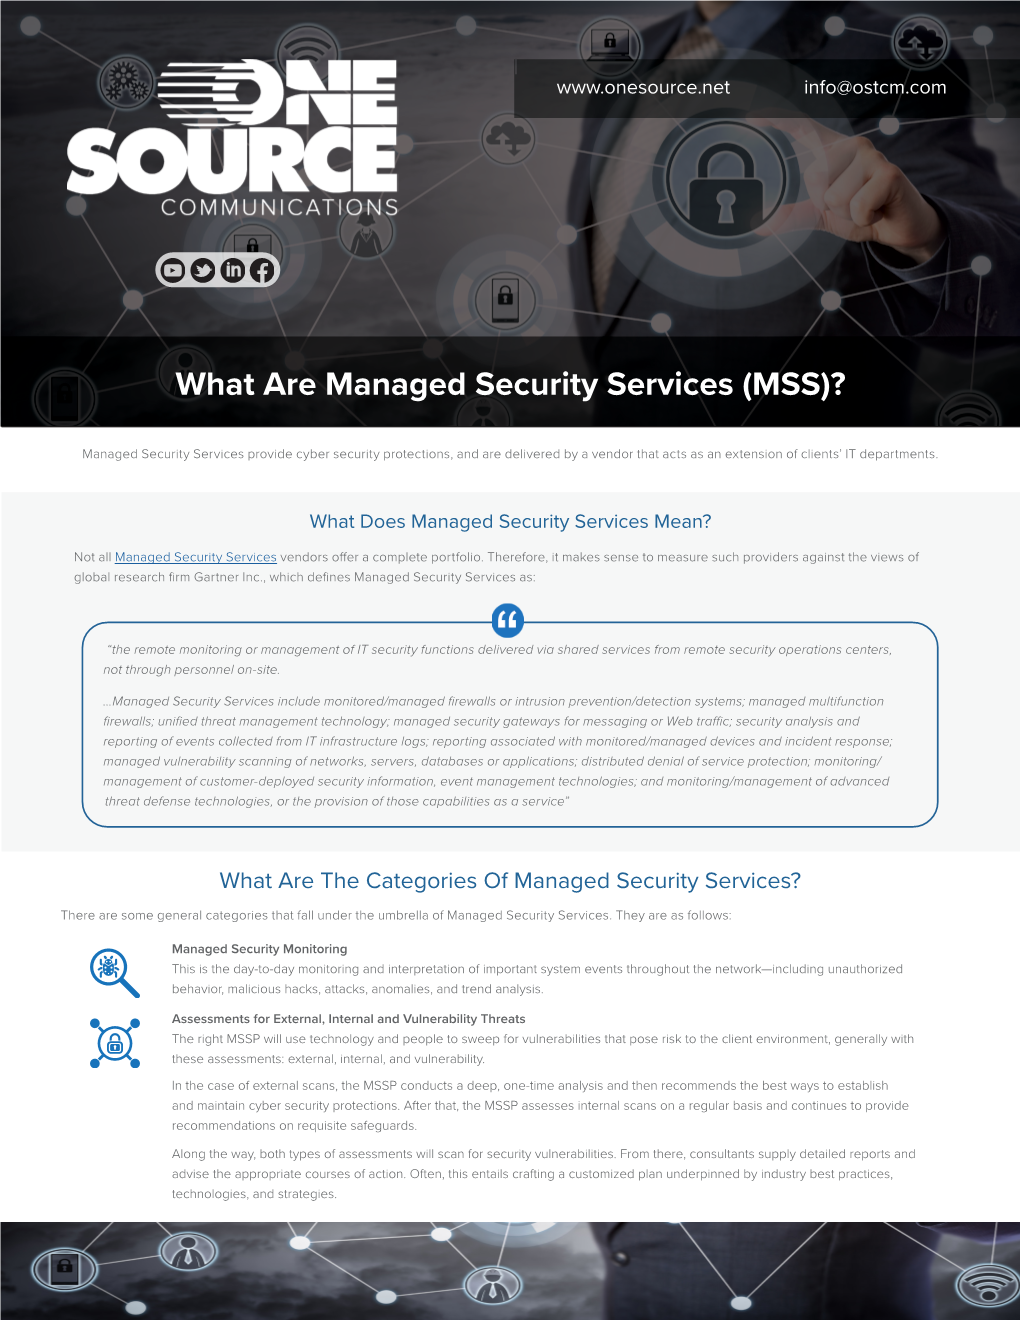 What Are Managed Security Services (MSS)?